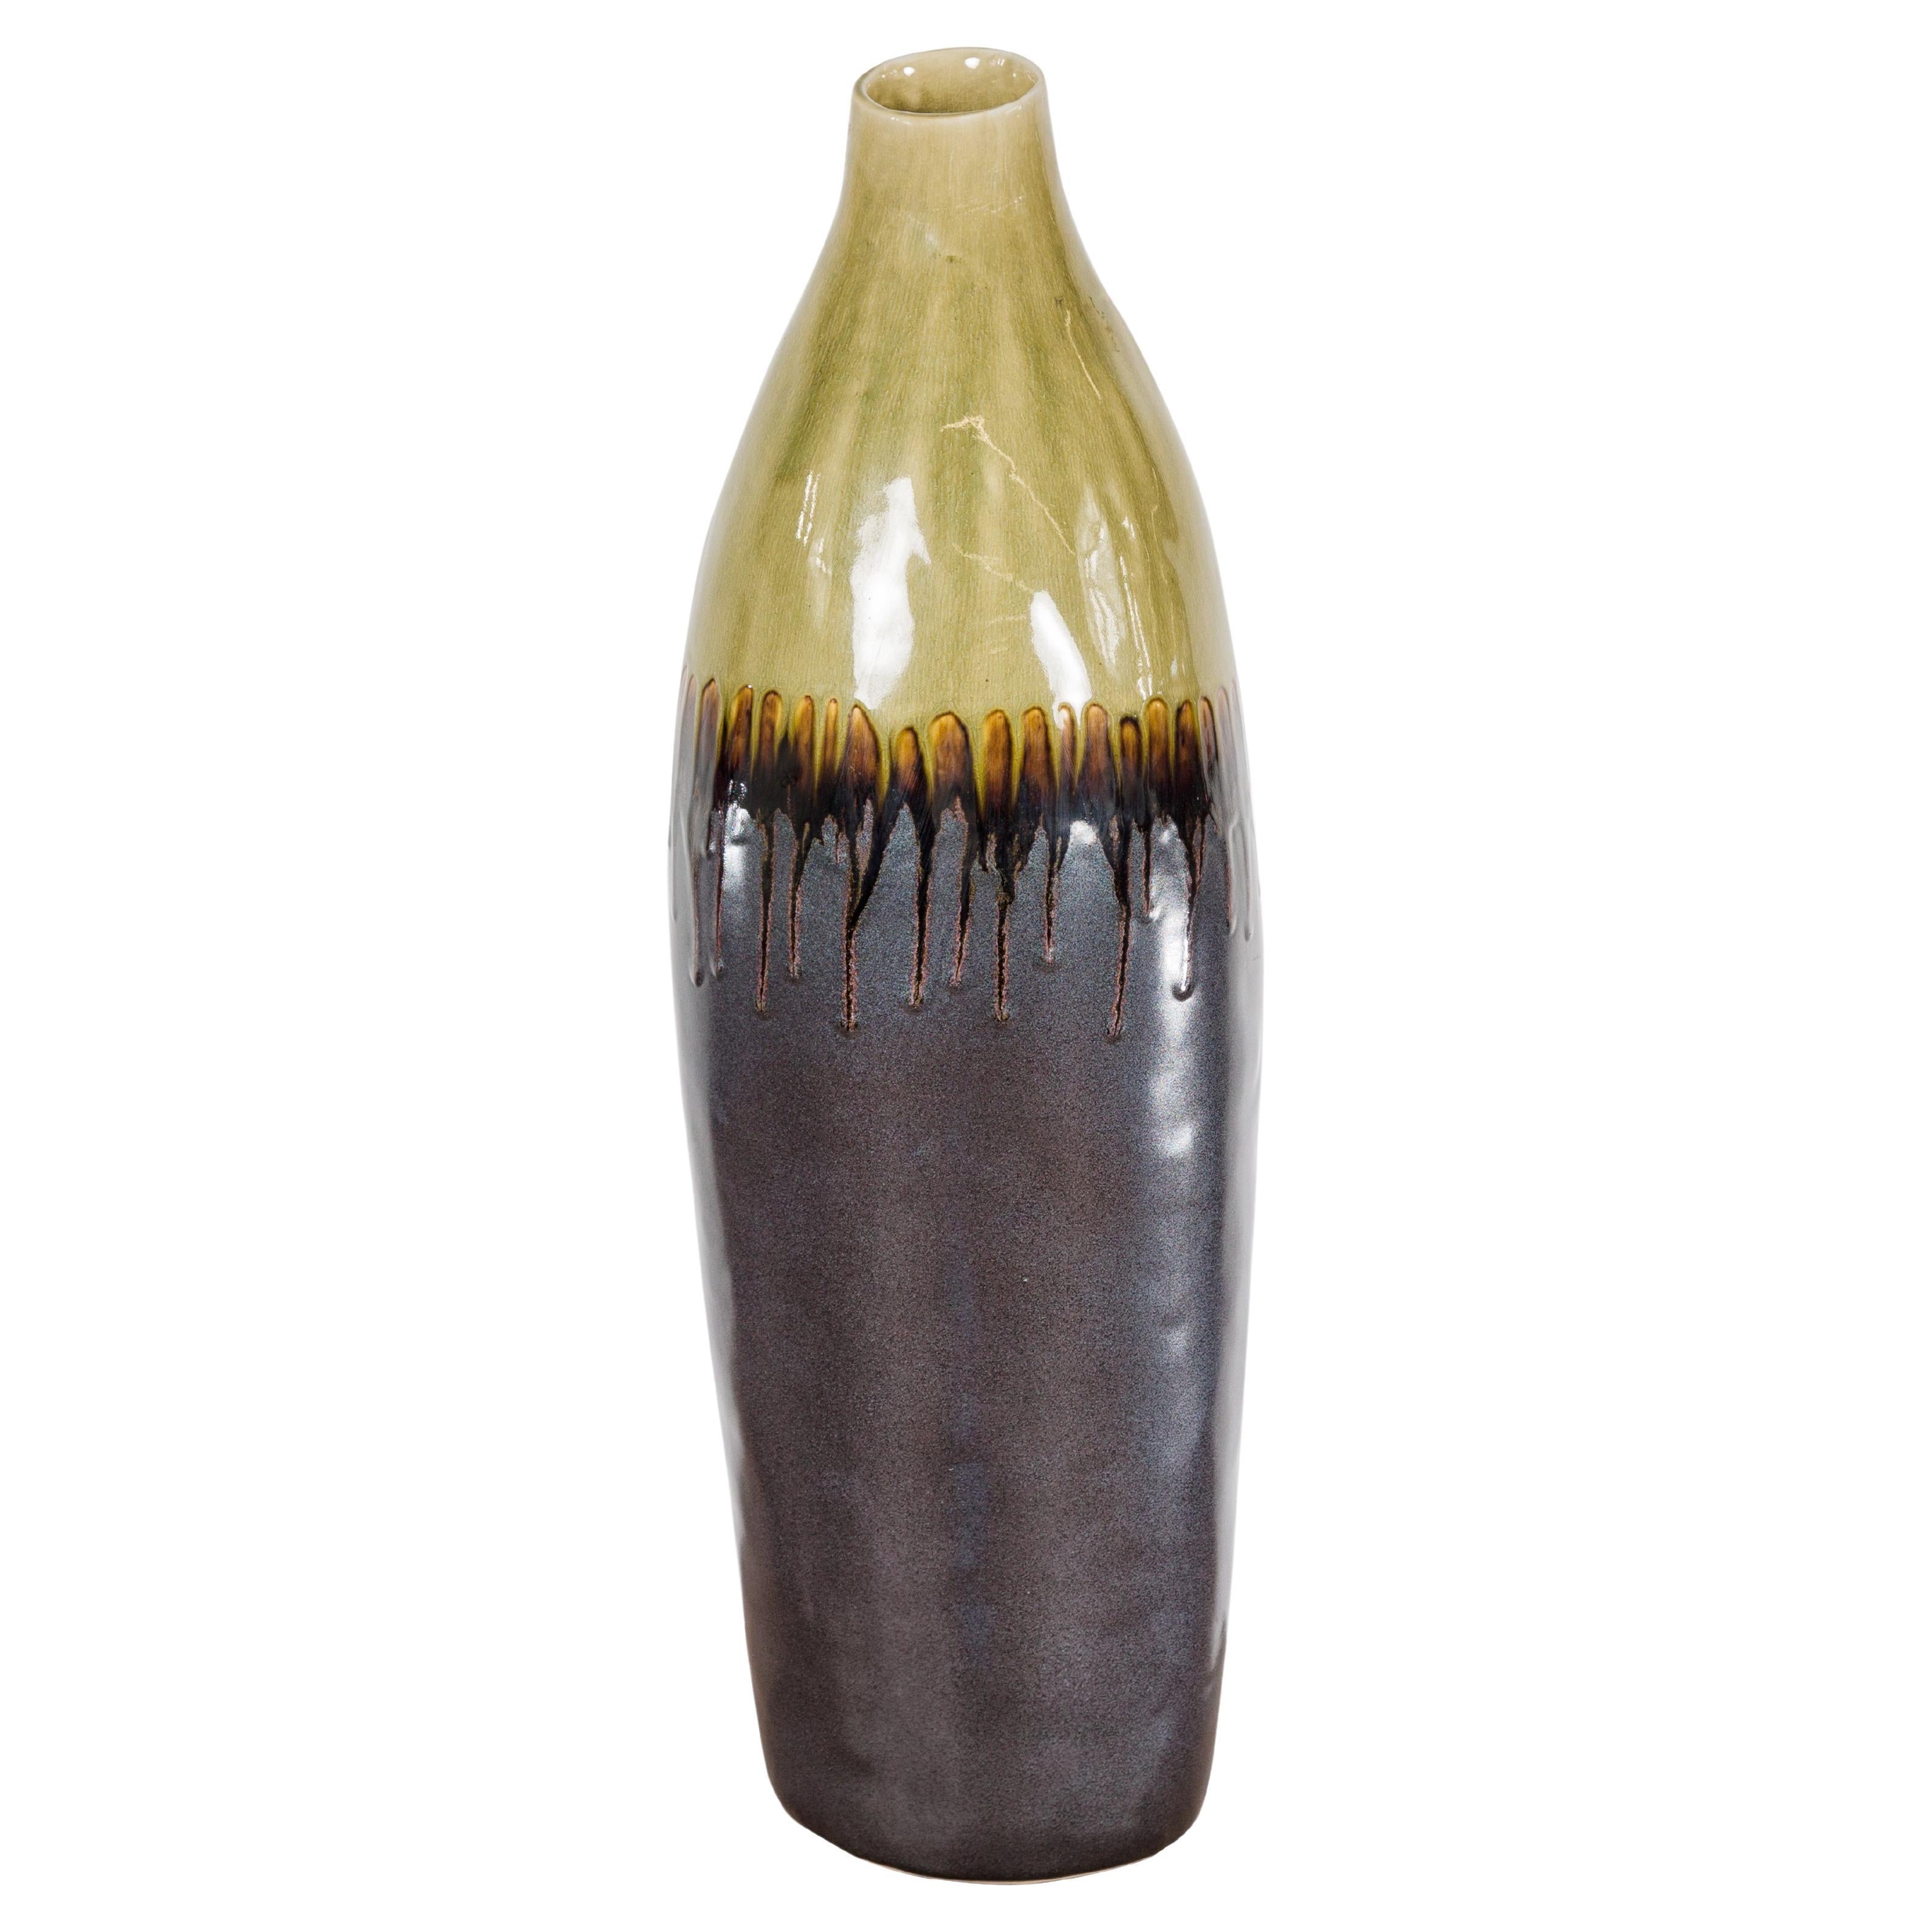 Handmade Artisan Ceramic Vase with Olive Green, Dark Grey and Brown Dripping For Sale